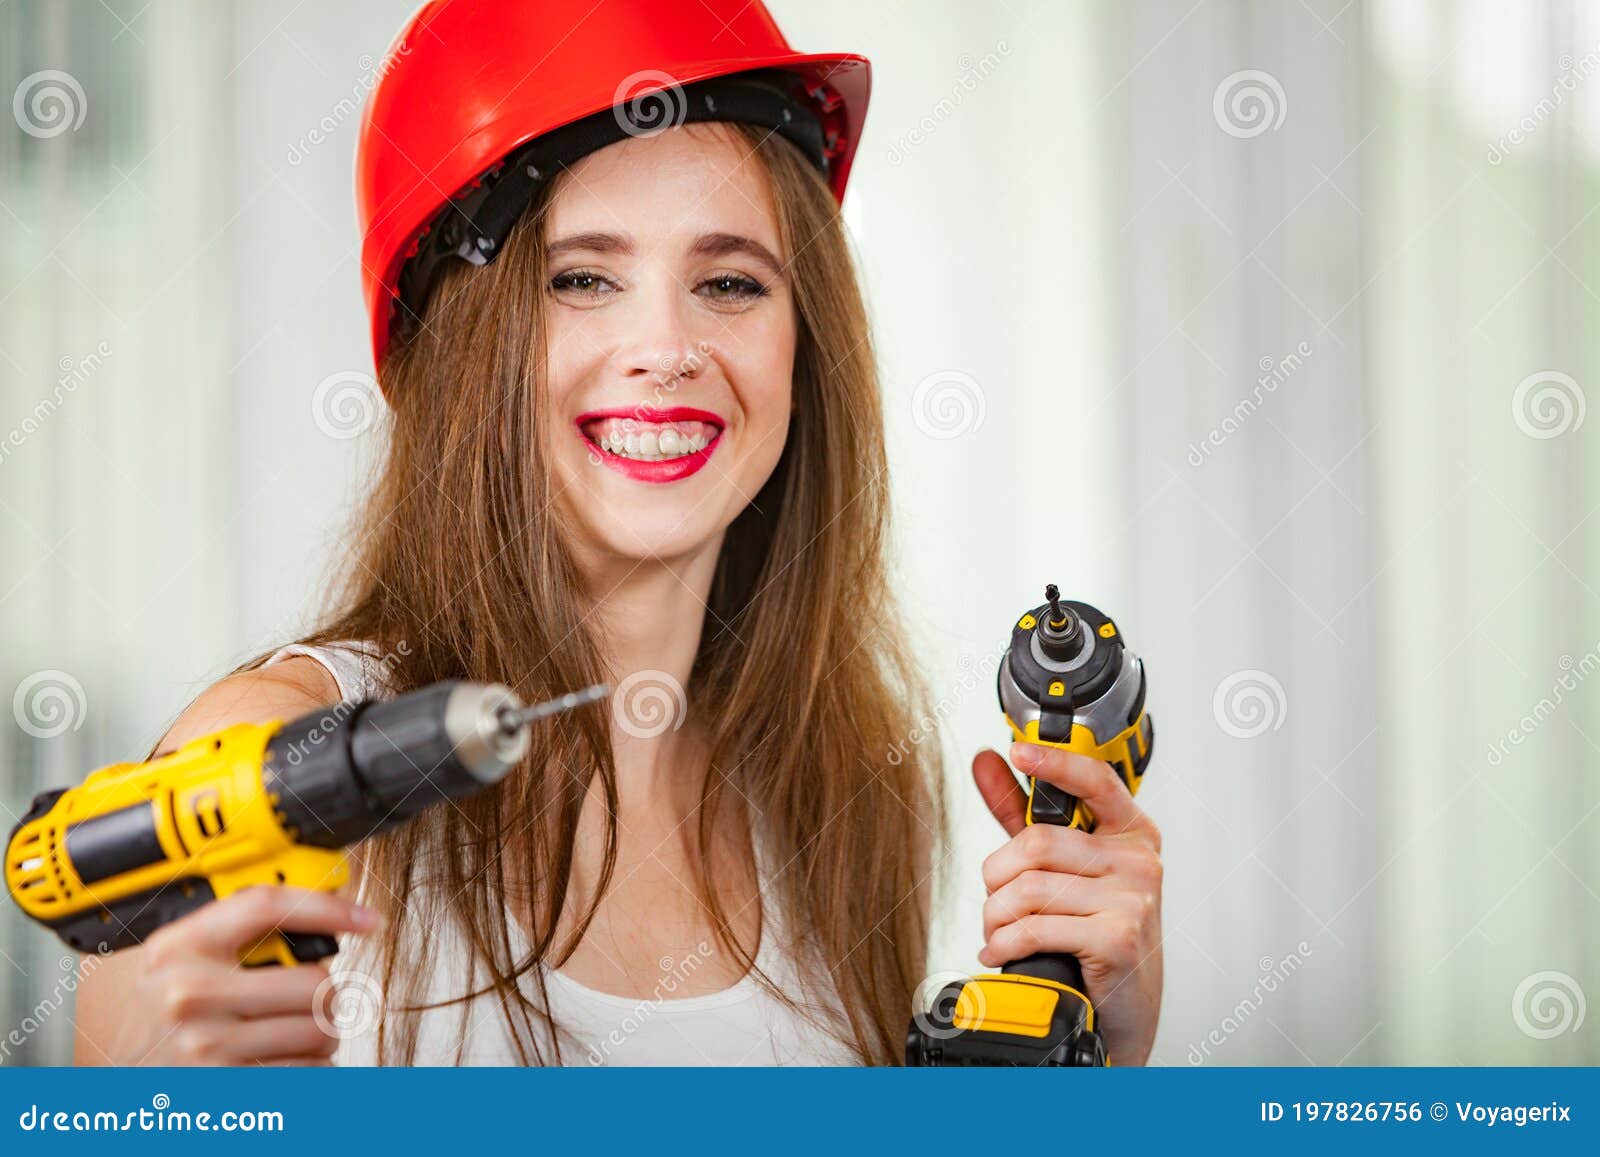 Woman using power driil for work at home. Young woman using power driil and screwdriver for work at home. Girl working at flat remodeling. Building, repair and renovation